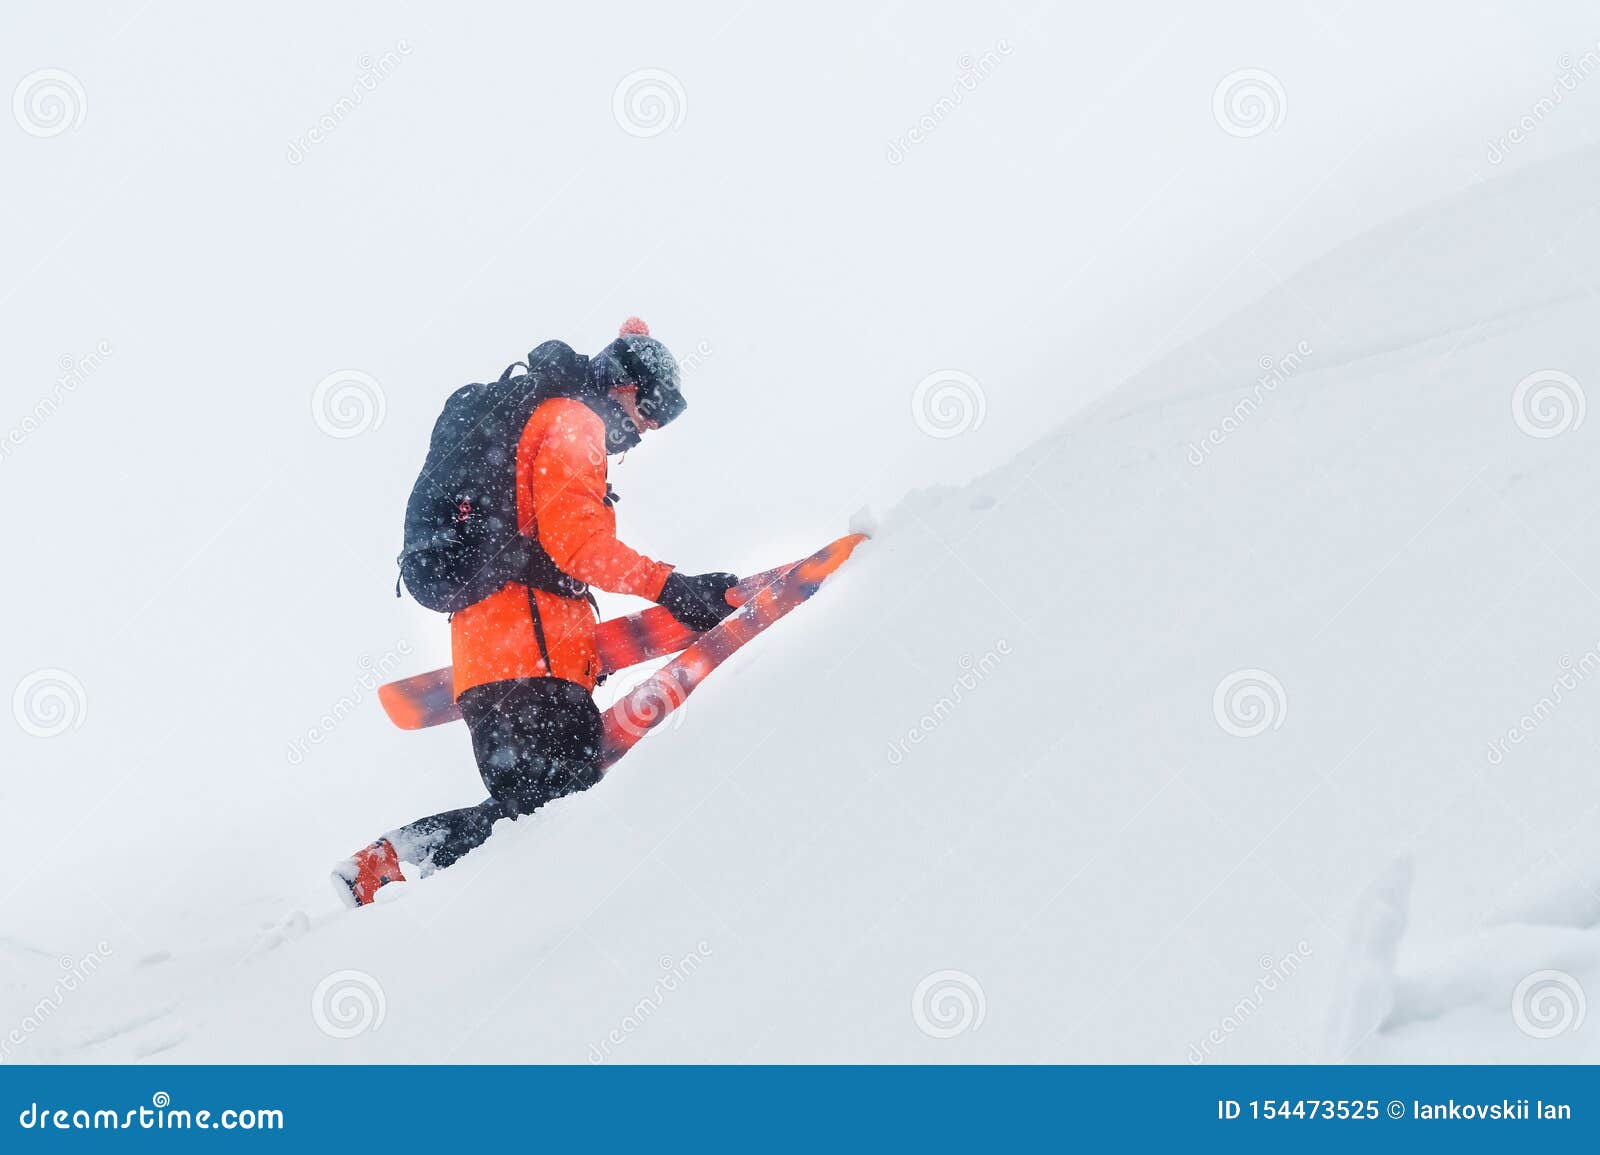 Portrait of a Professional Skier Climbing a Slope with Skies in a ...